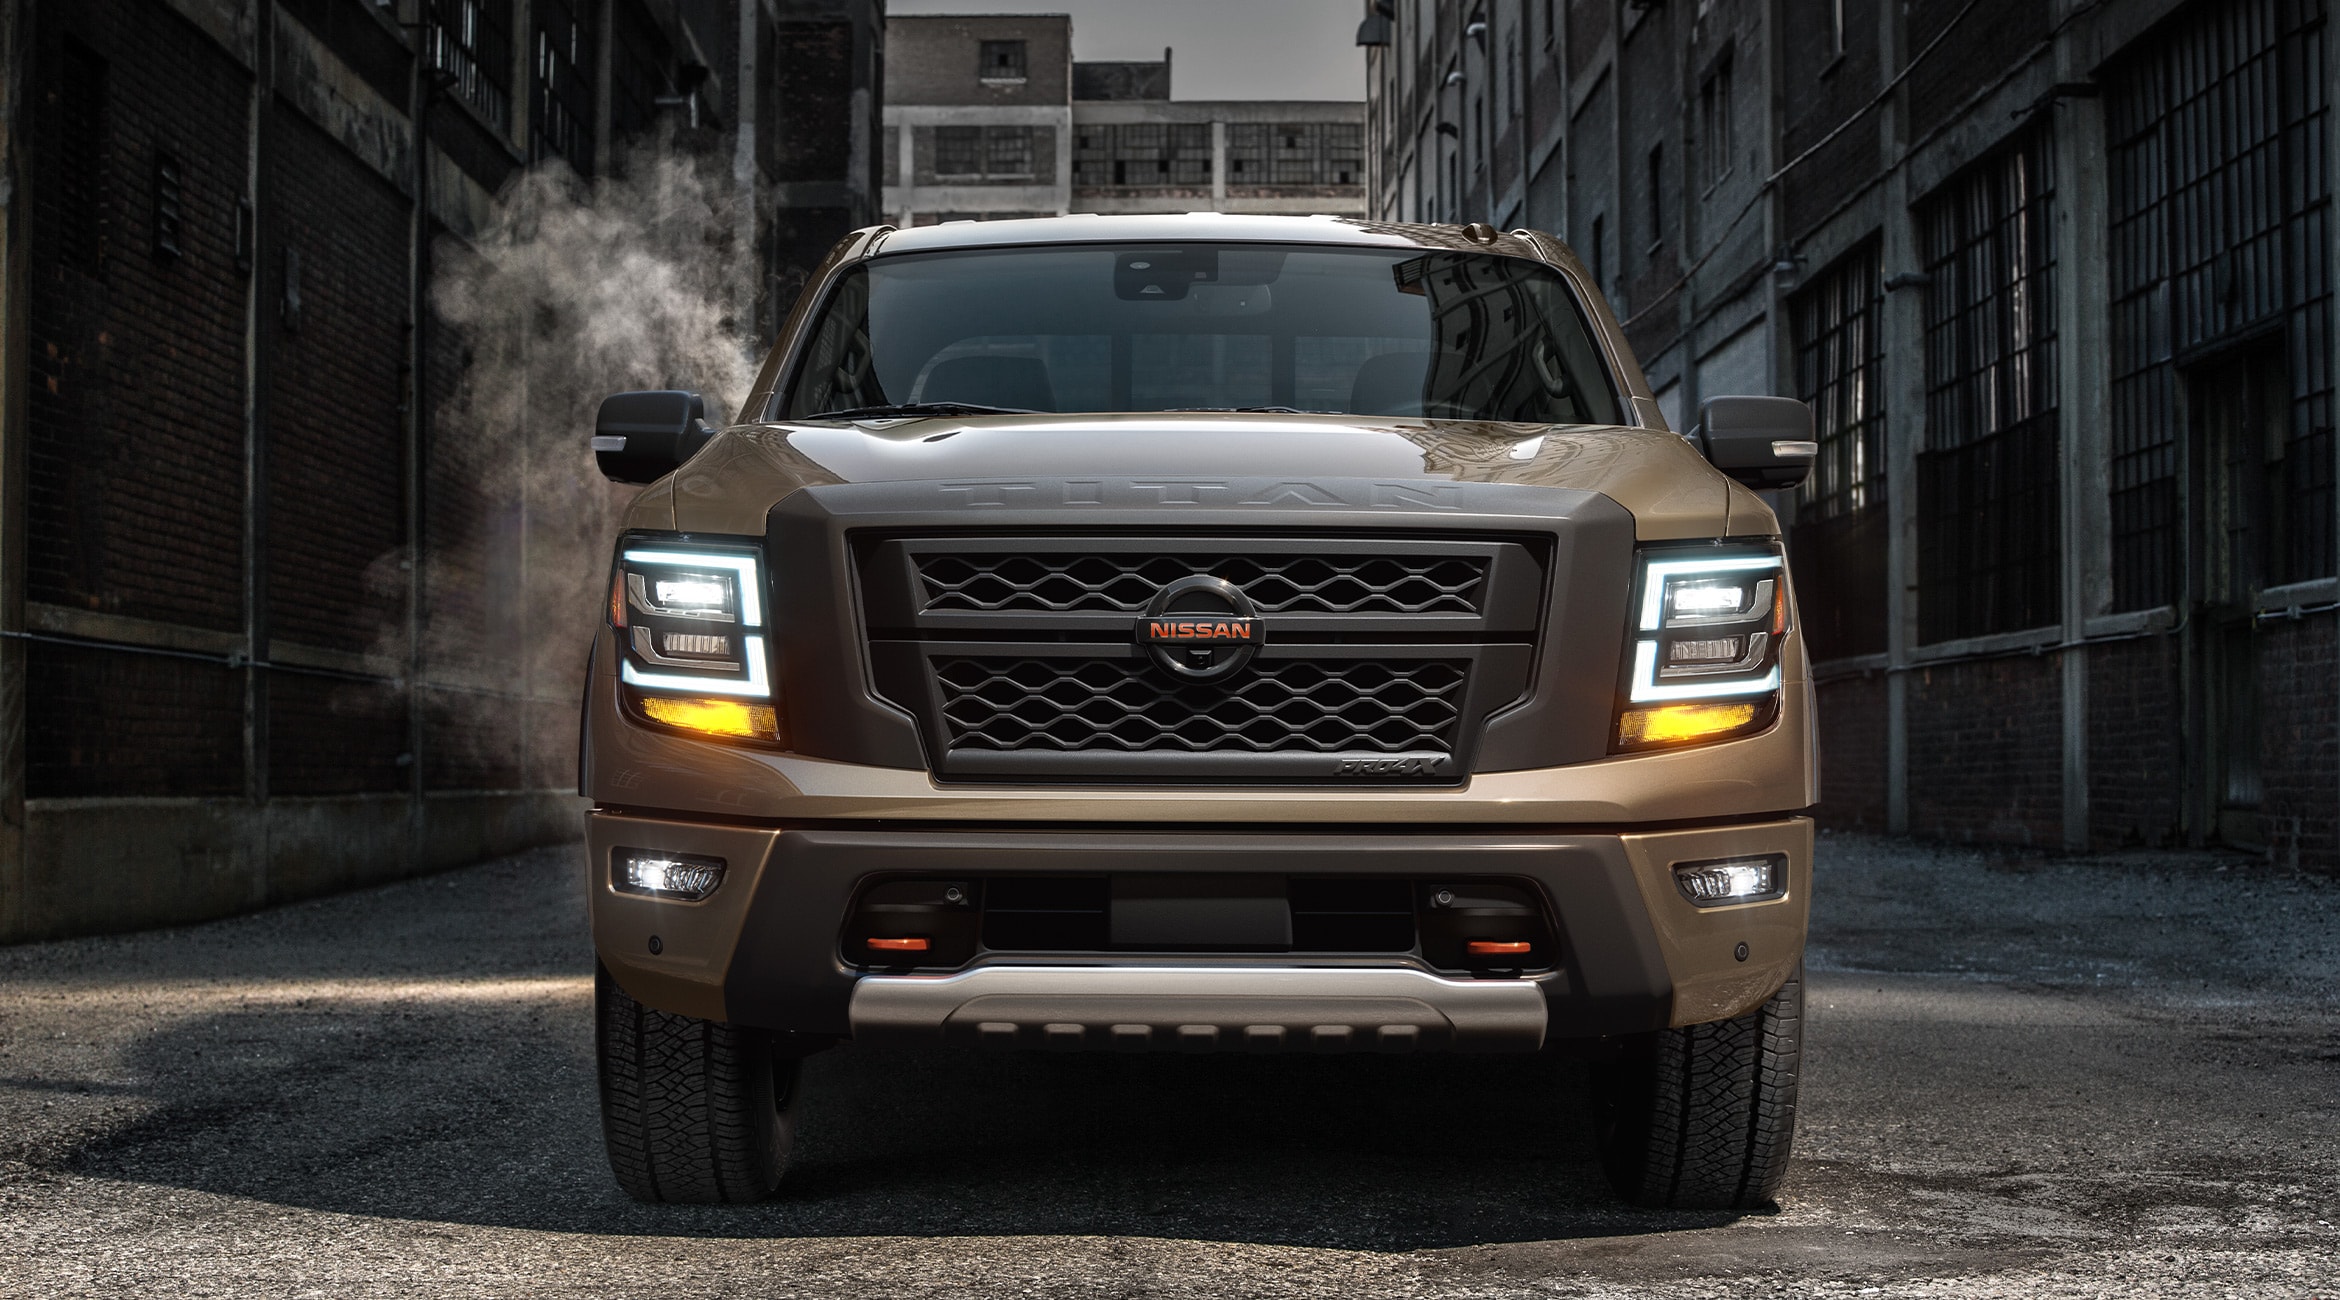 Front profile of a brown Nissan Titan Truck